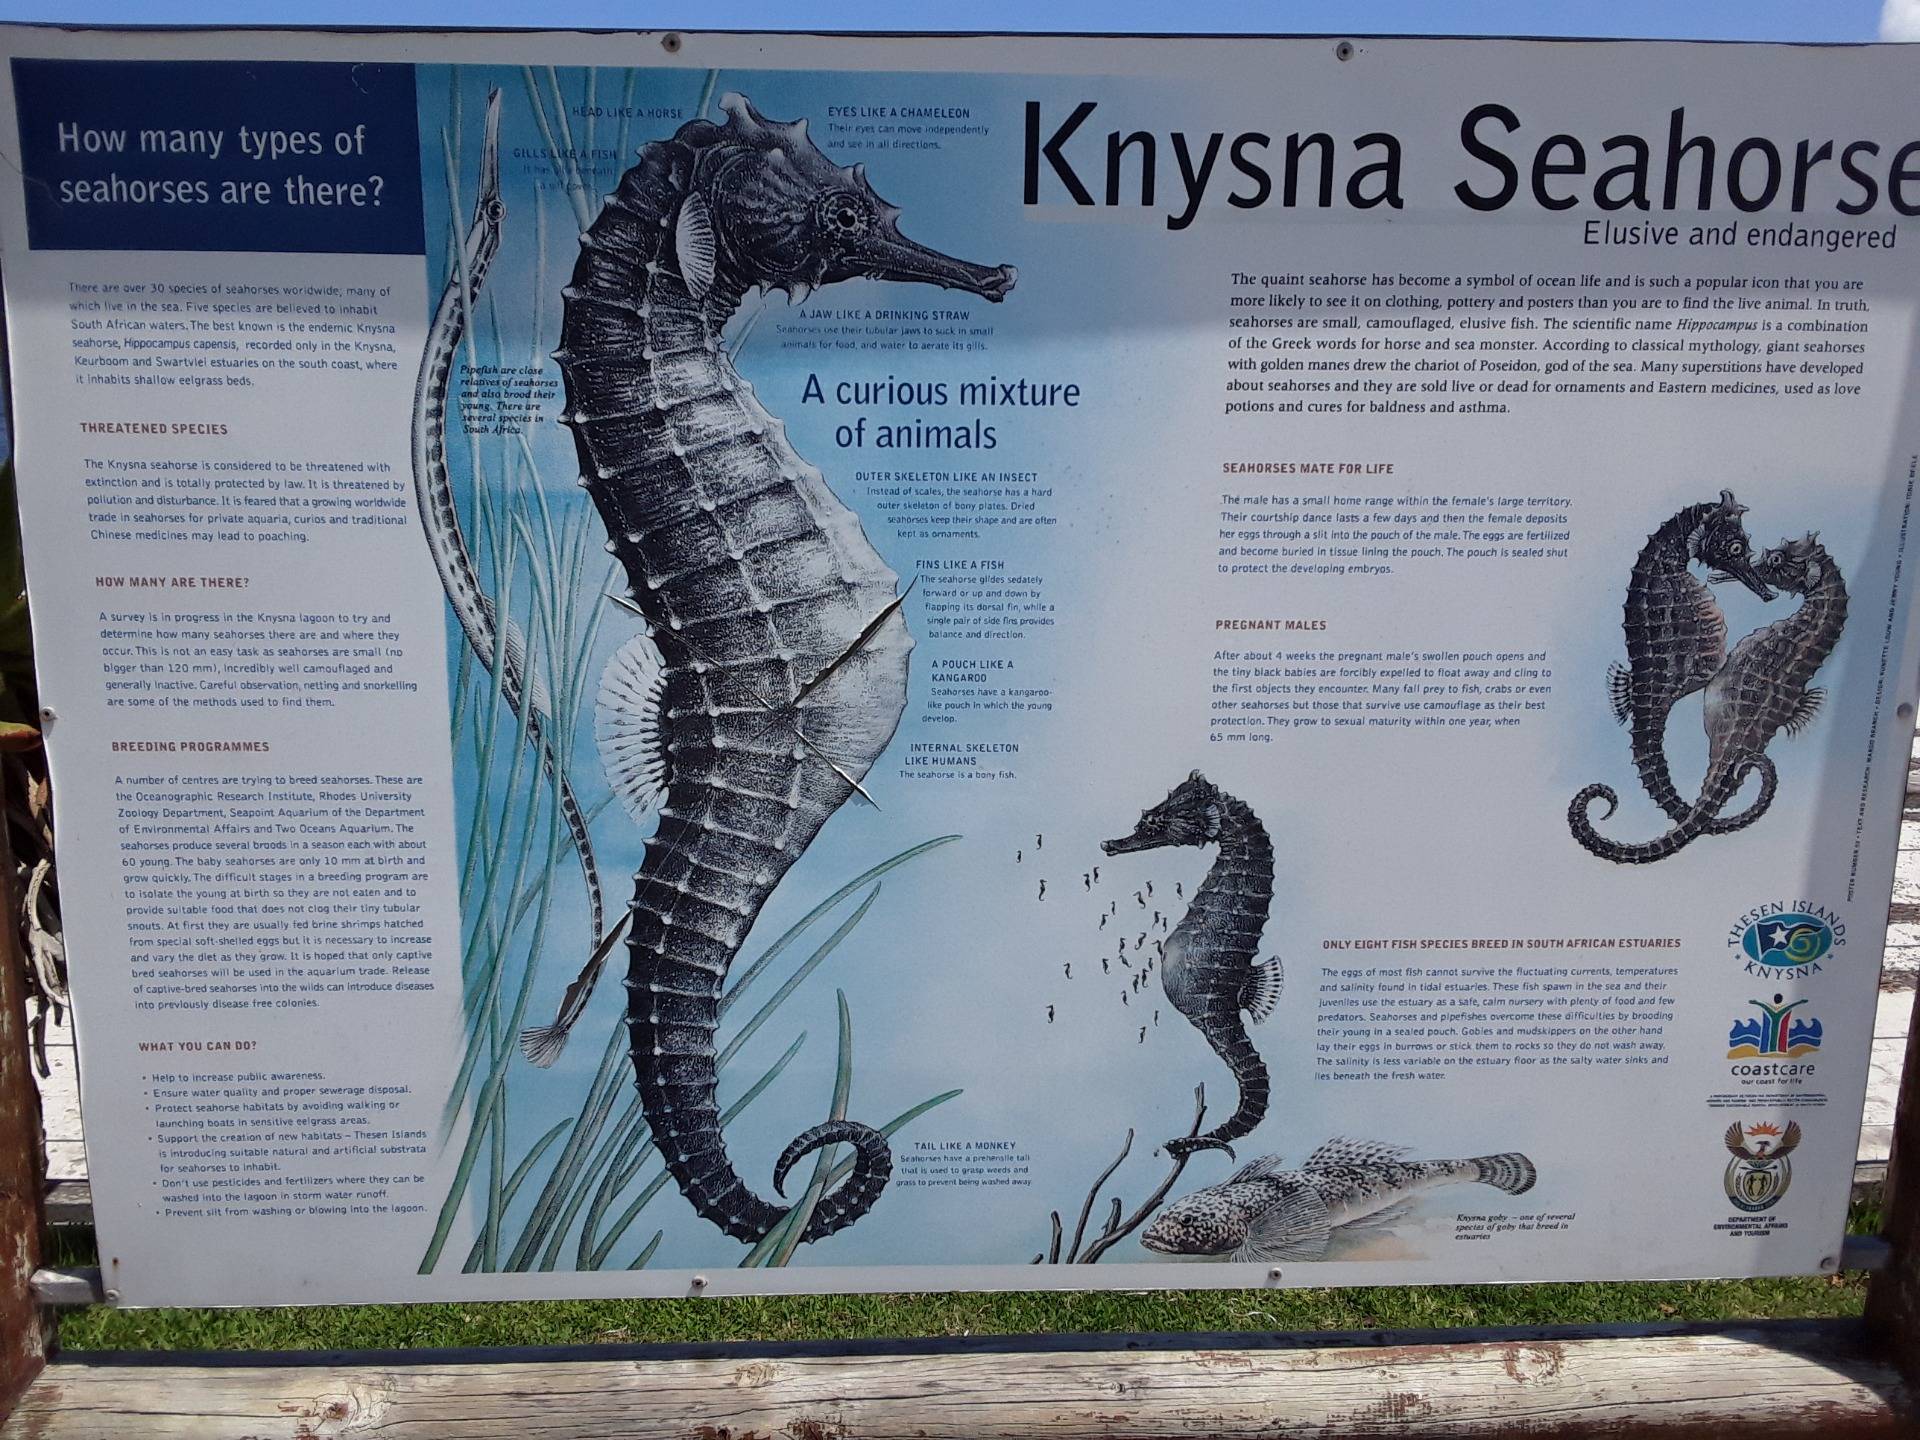 The fabled Knysna seahorse, a true anomaly